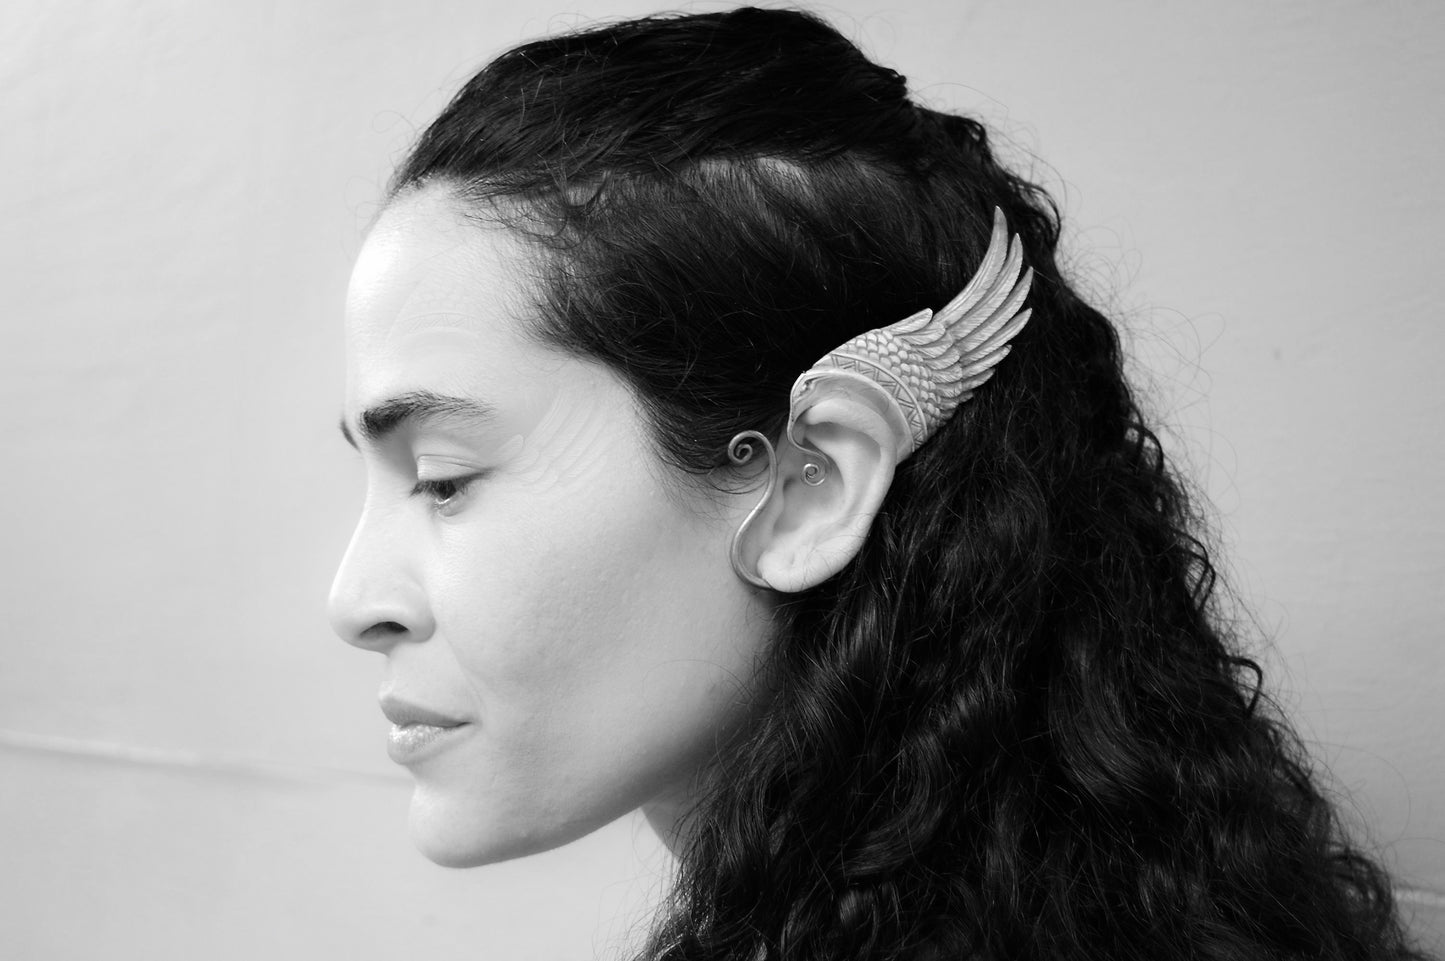 Wing Ear Cuffs - Light Mother of Pearl